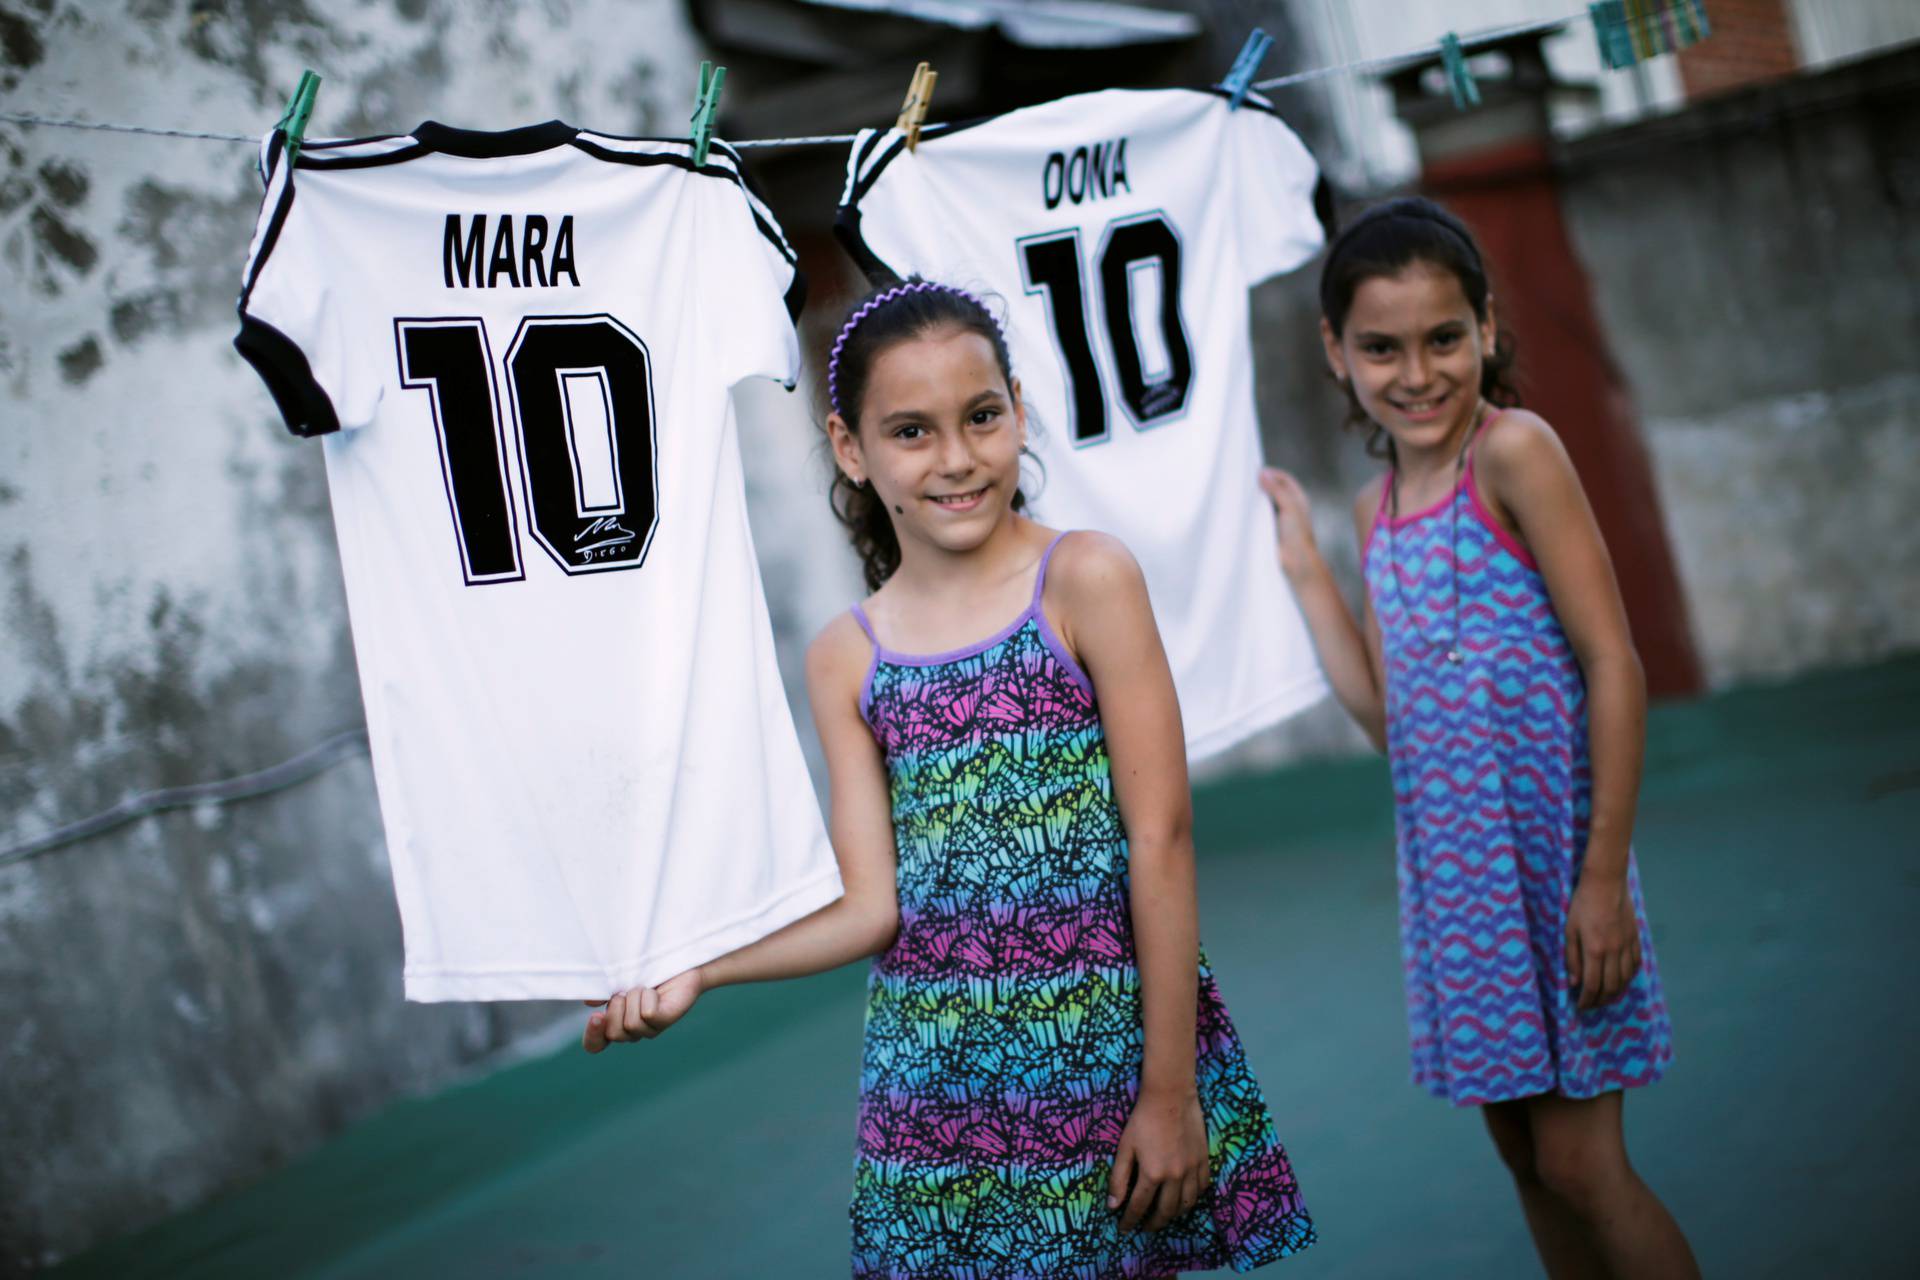 Mara and Dona, twin daughters of Walter Gaston Rotundo,a devoted Diego Maradona fan who named his daughters after the soccer star, stand near t-shirts with their names, in Buenos Aires